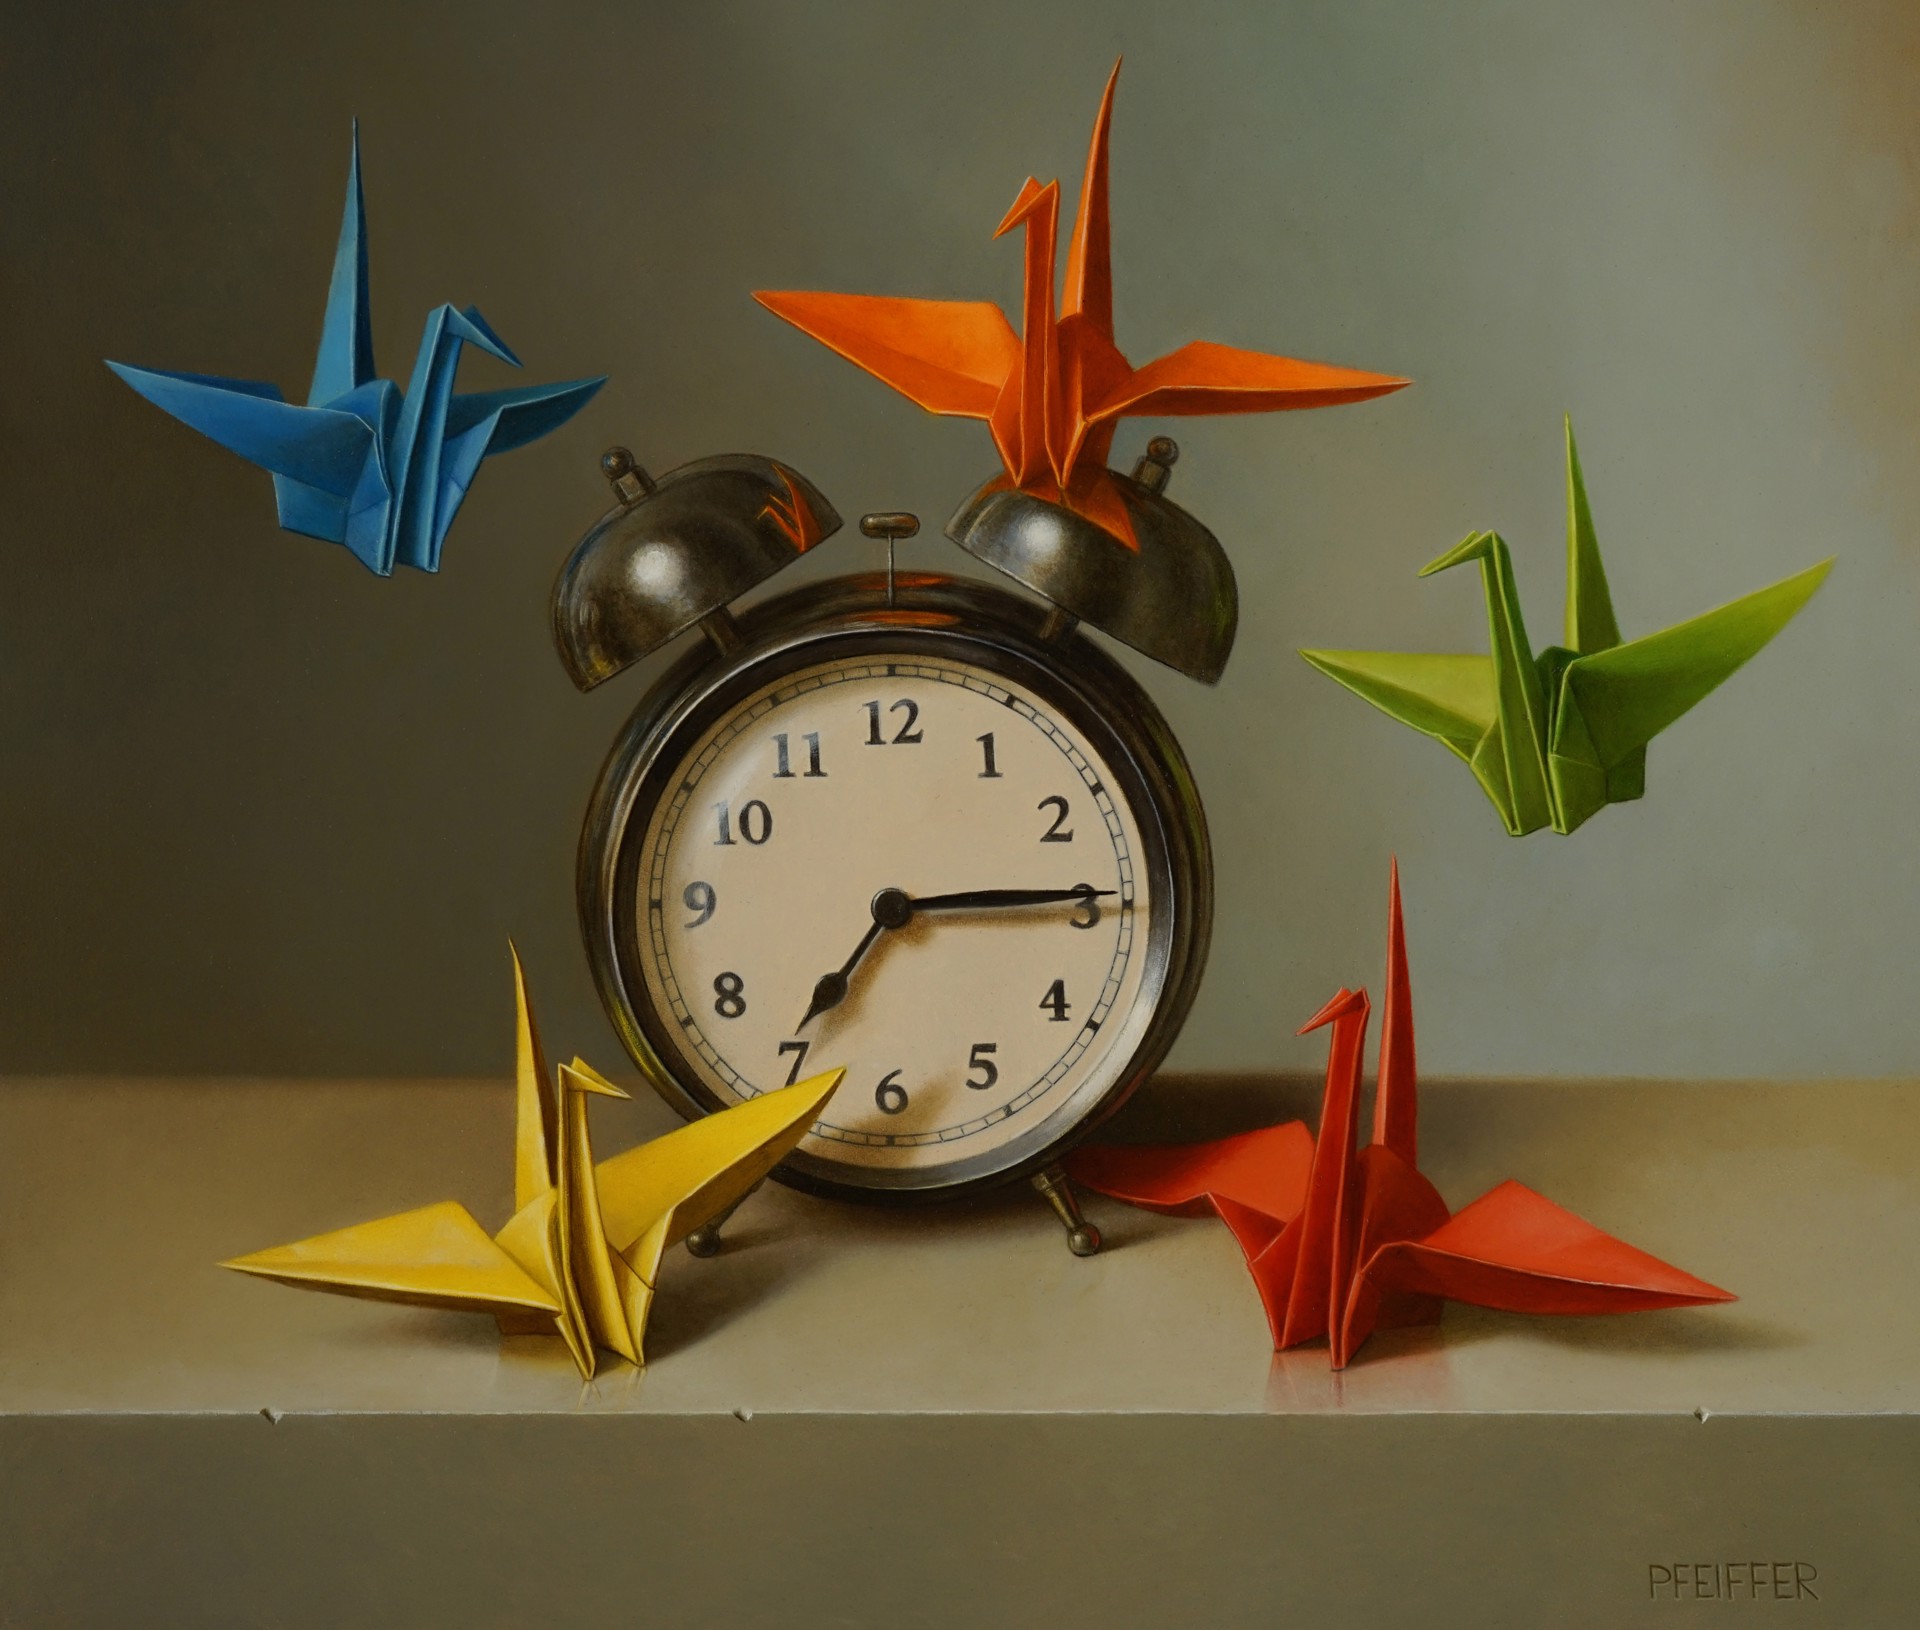 Time Flies by Jacob A. Pfeiffer